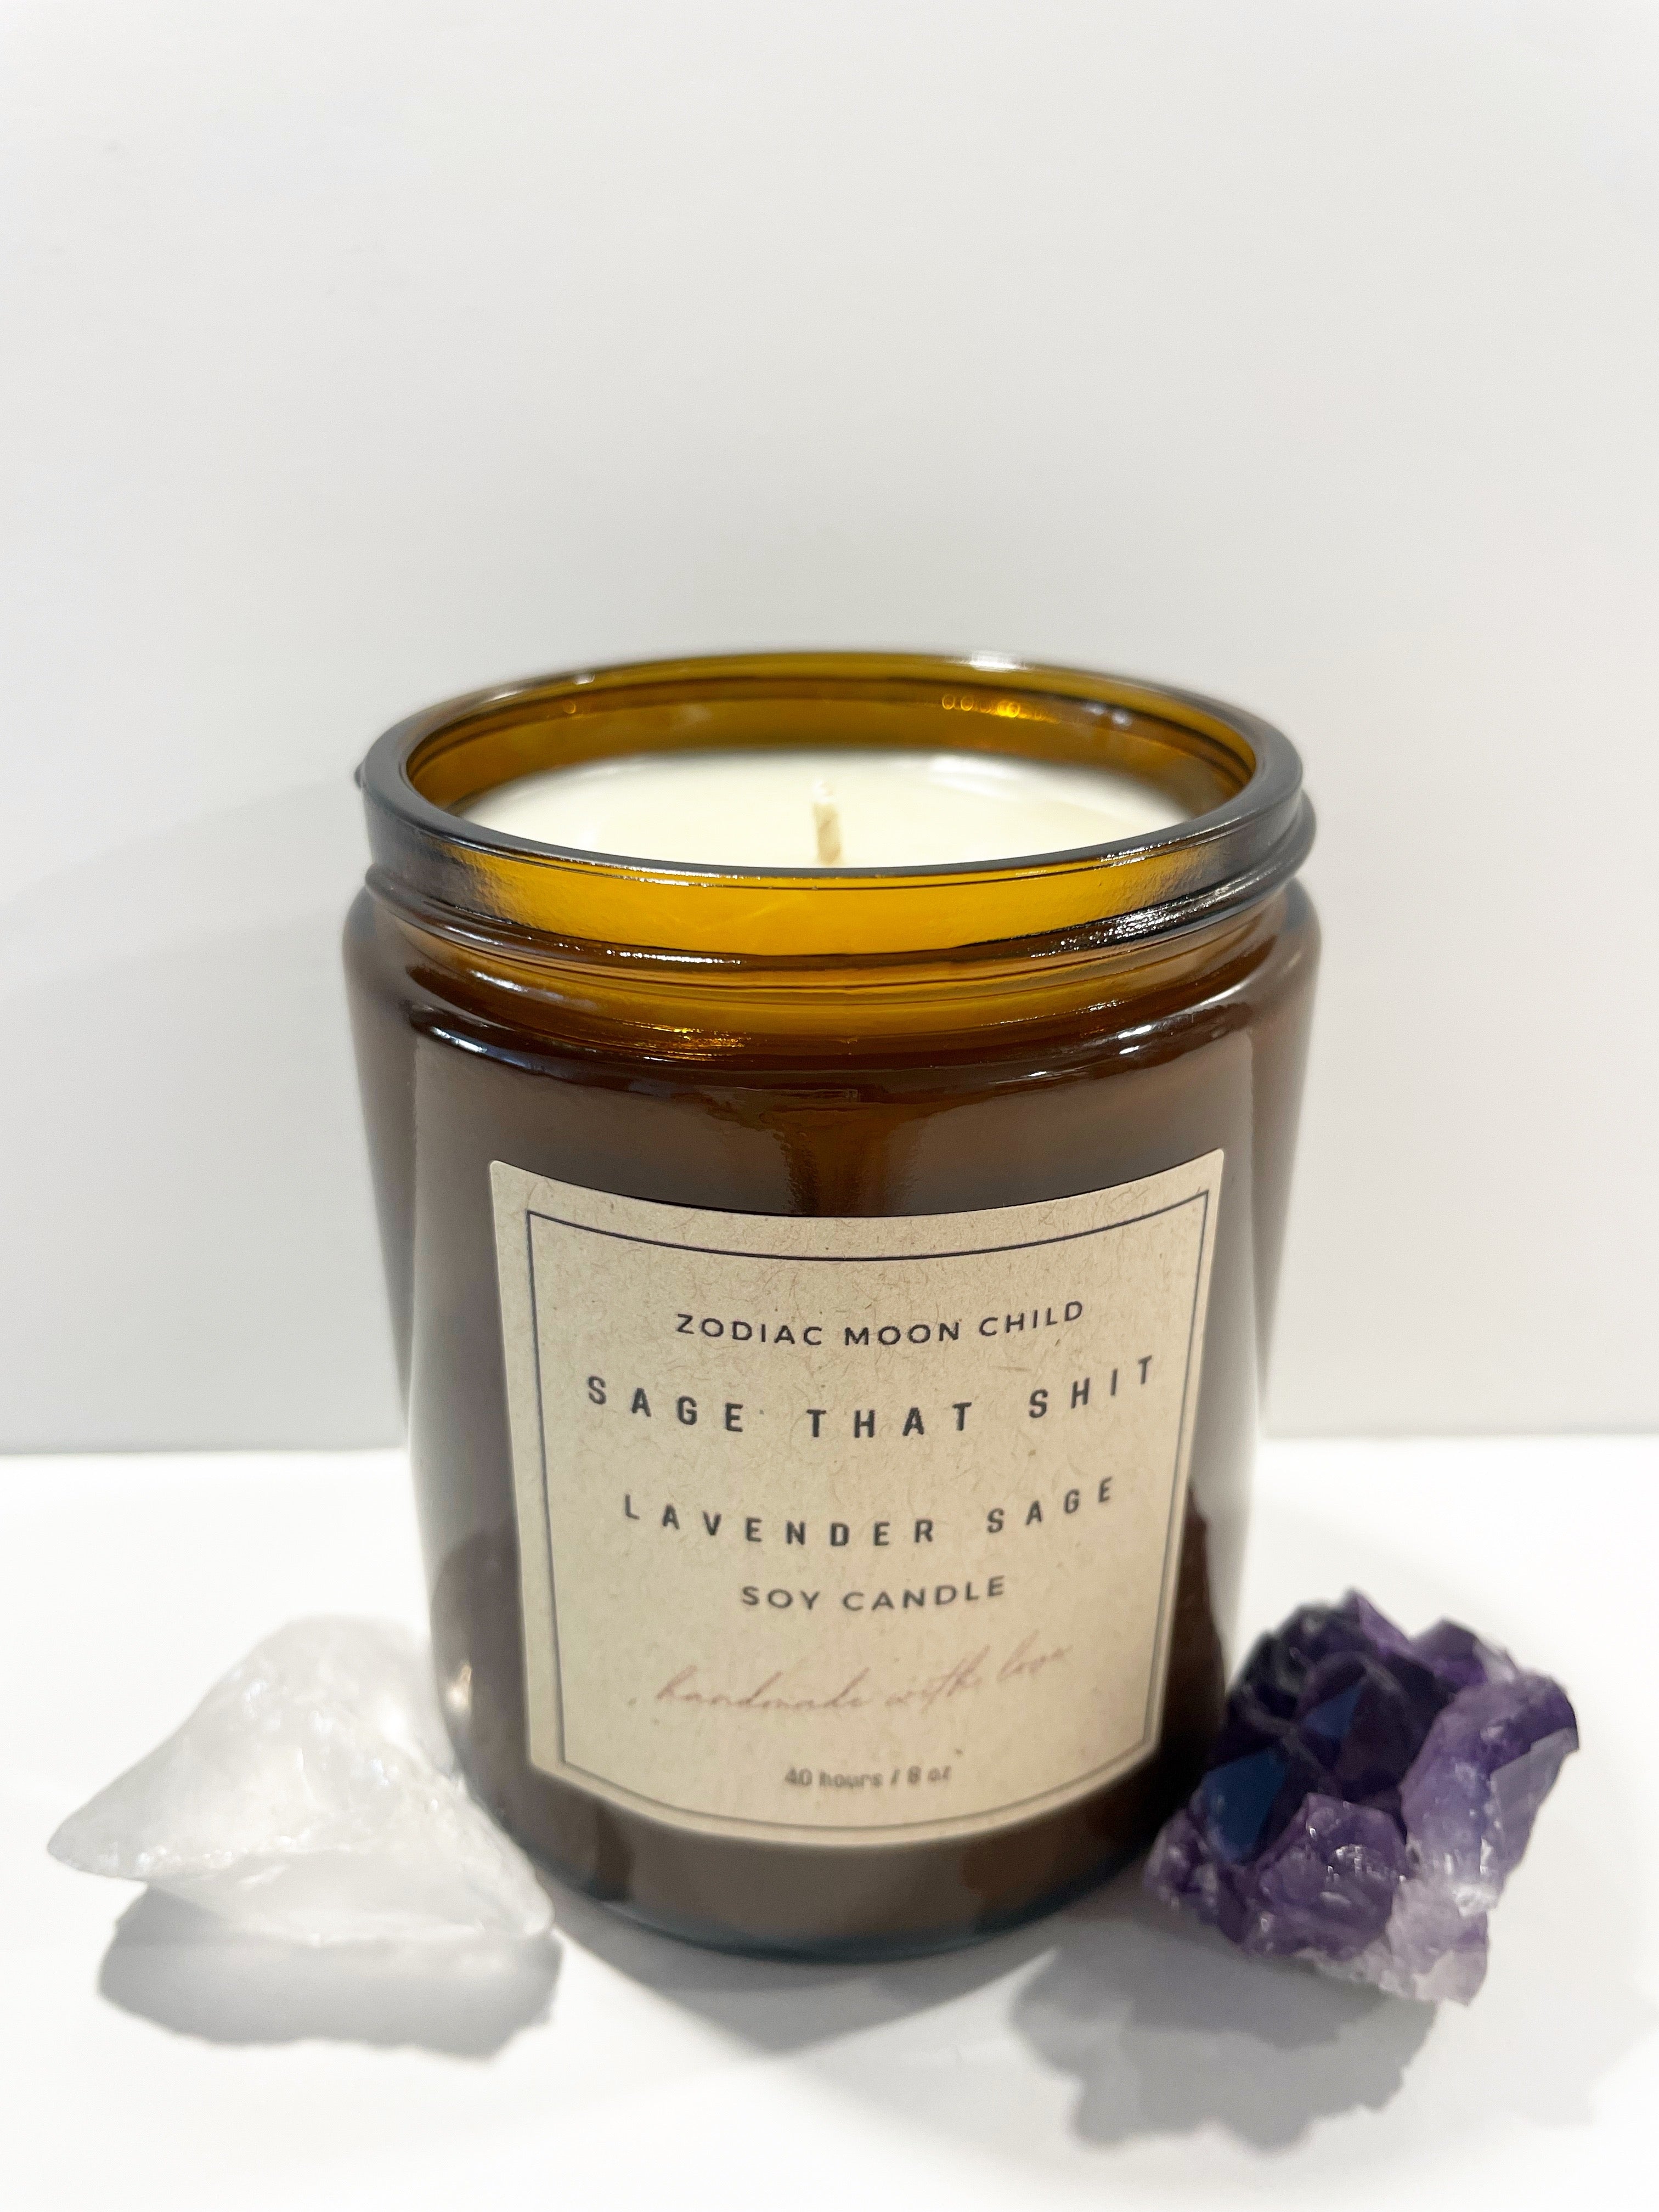 Sage That Sh*t with Our Amber Spiritual Soy Candle - Embrace Positivity & Elevate Your Sacred Zen Space - 100% Natural Soy Wax, Energy